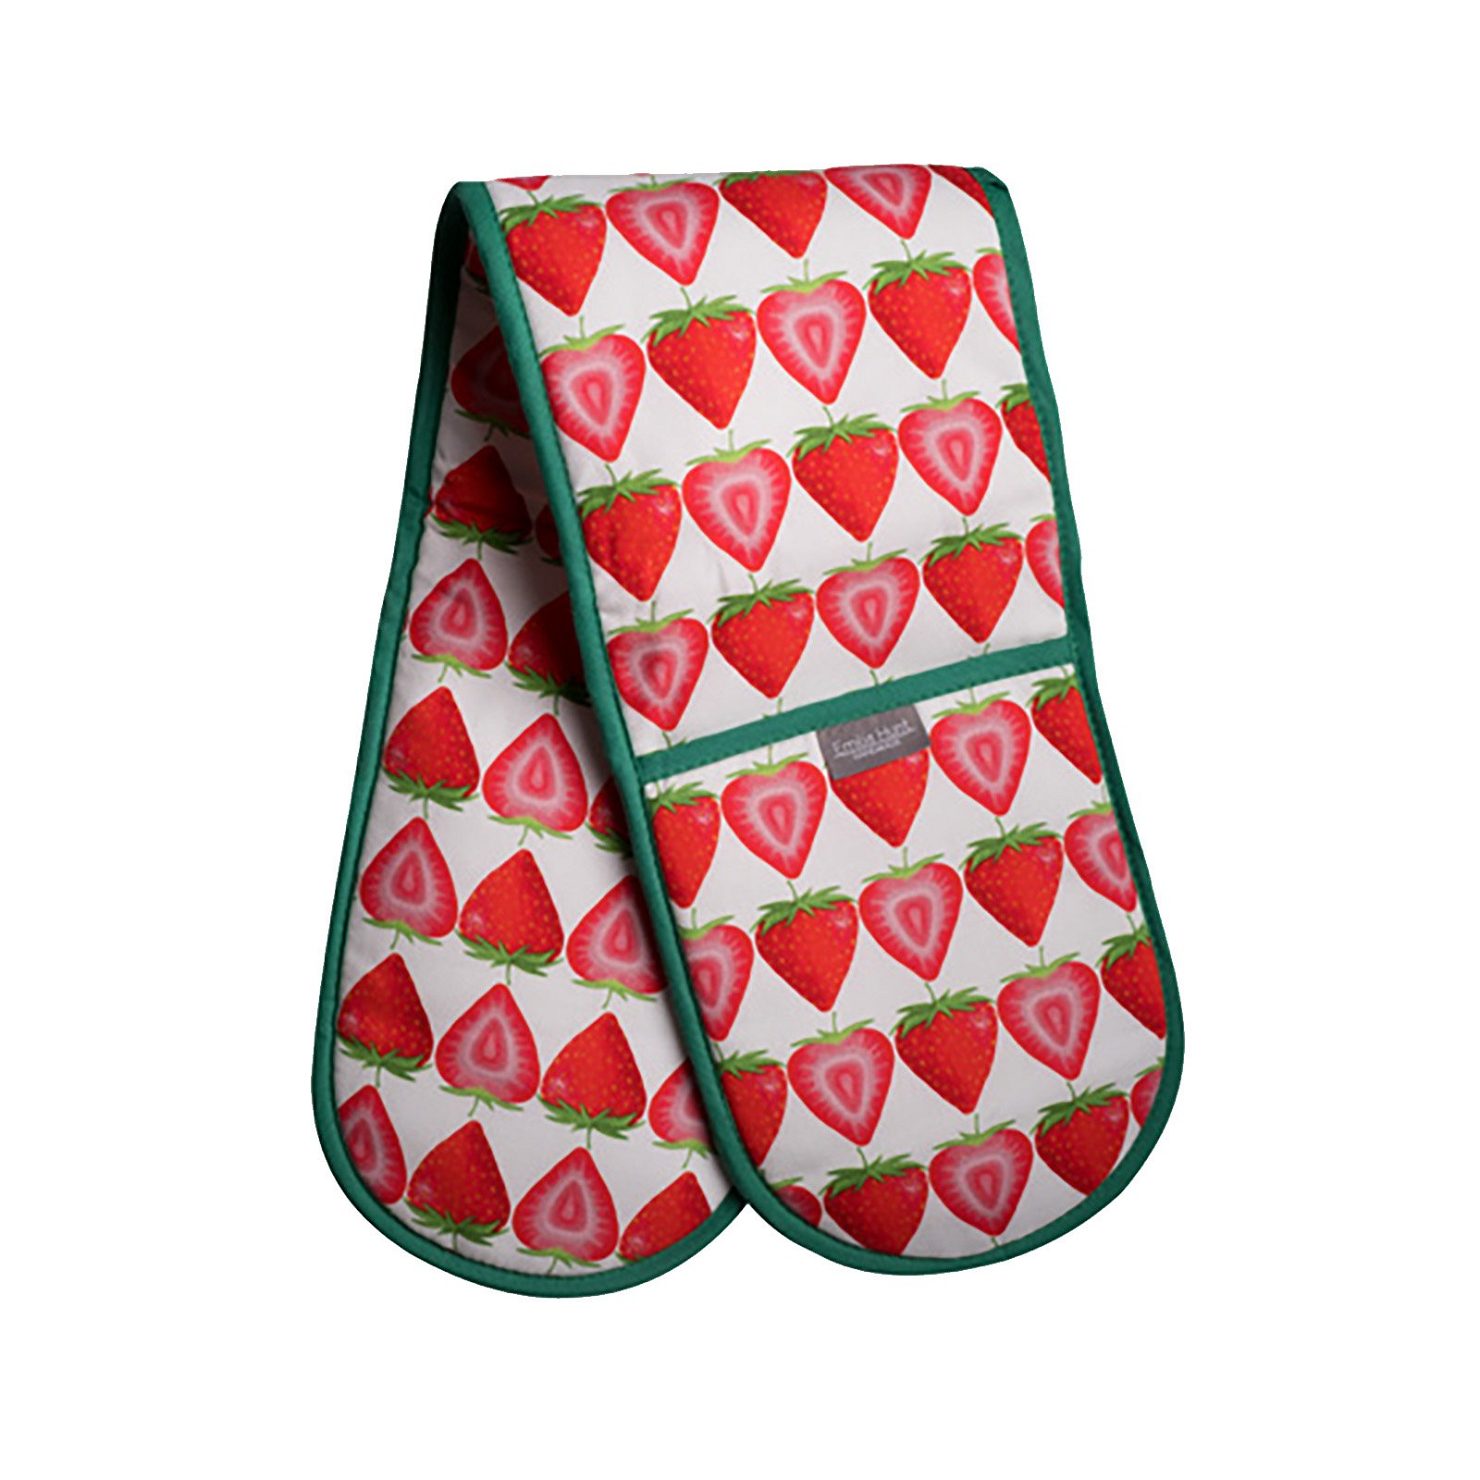 Strawberry Double Oven Glove by Emilia Hunt (UK) - Finch & Lane